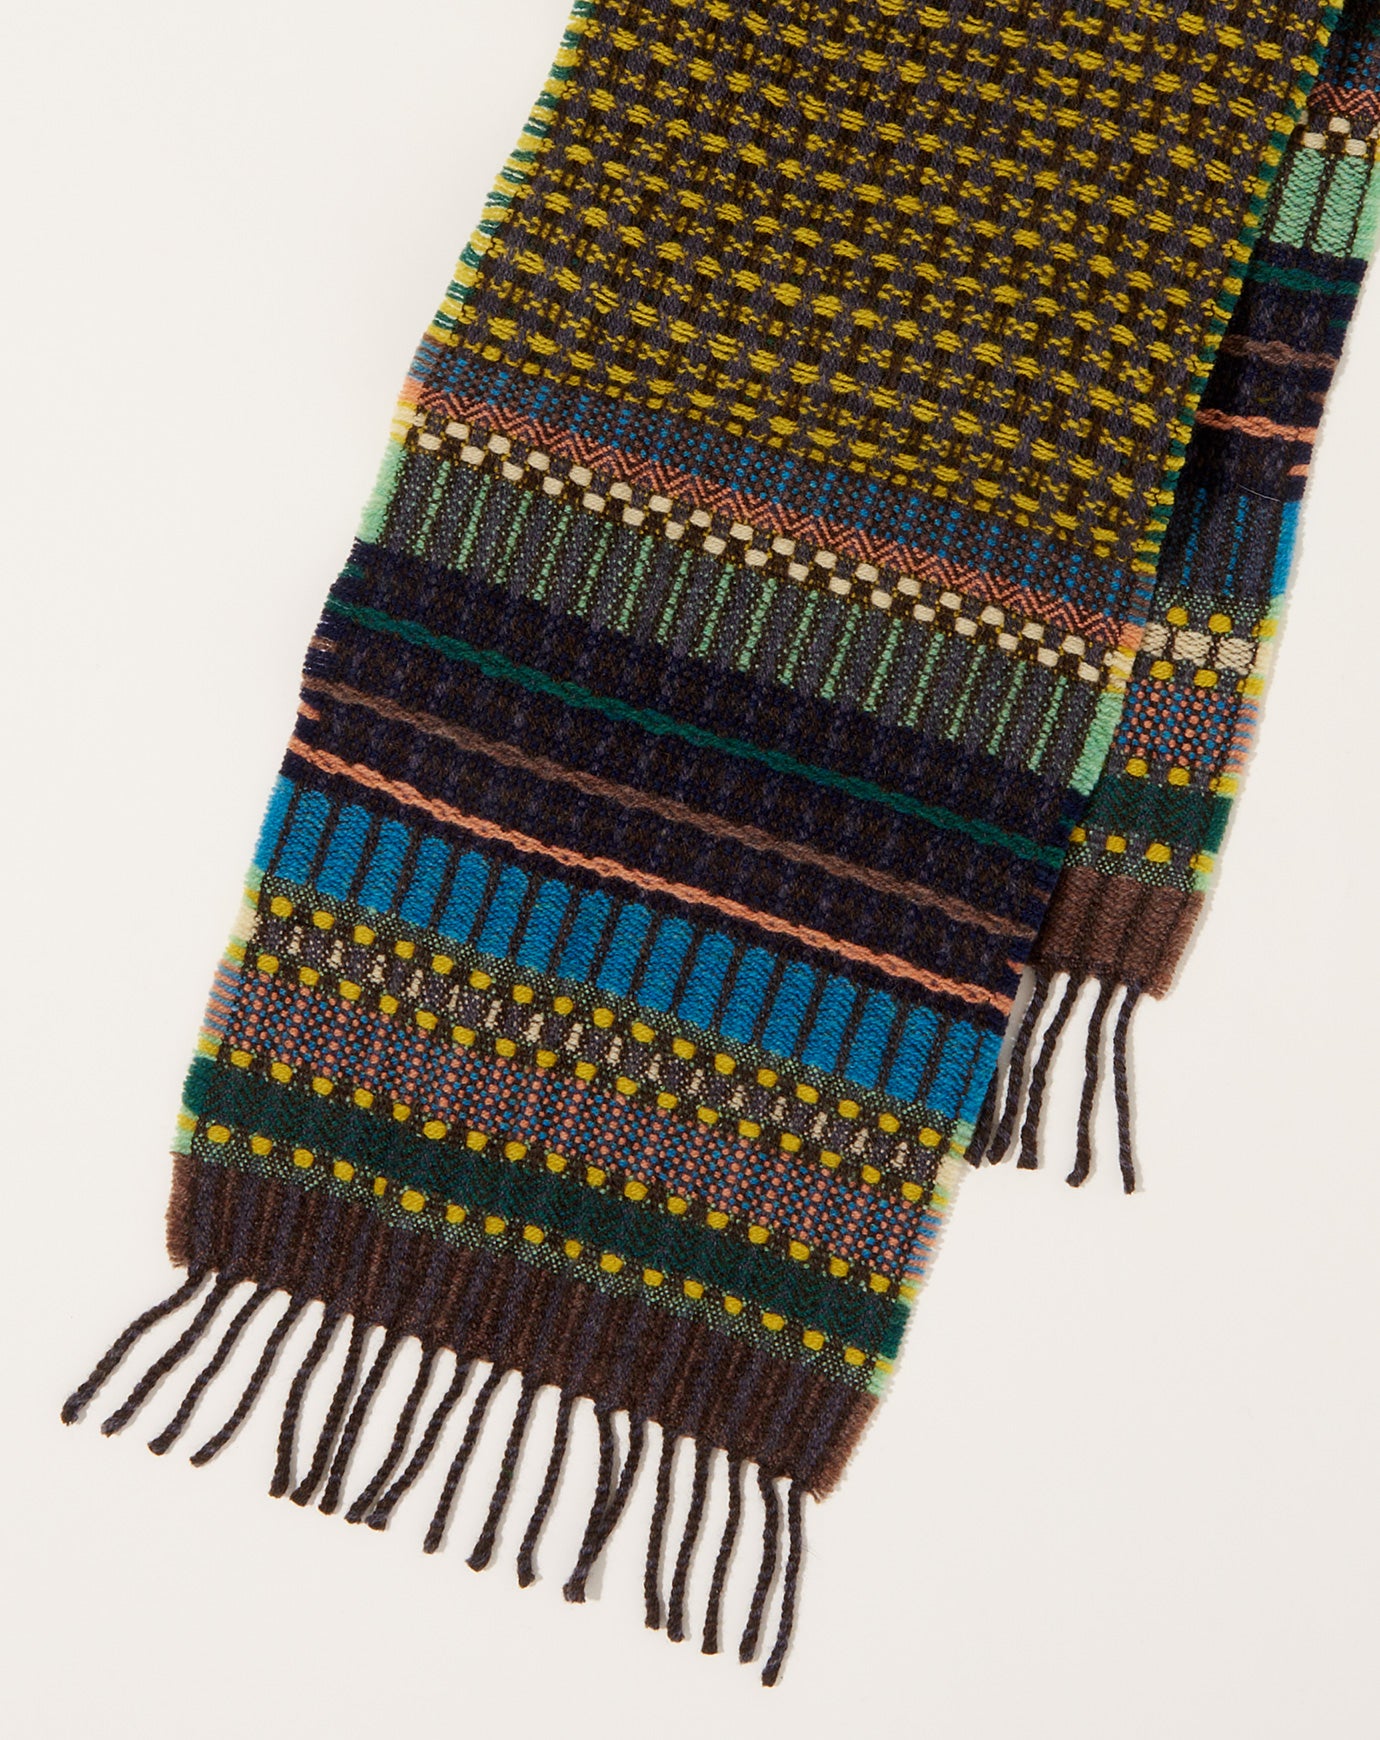 Wallace Sewell Fremont Scarf in Parakeet